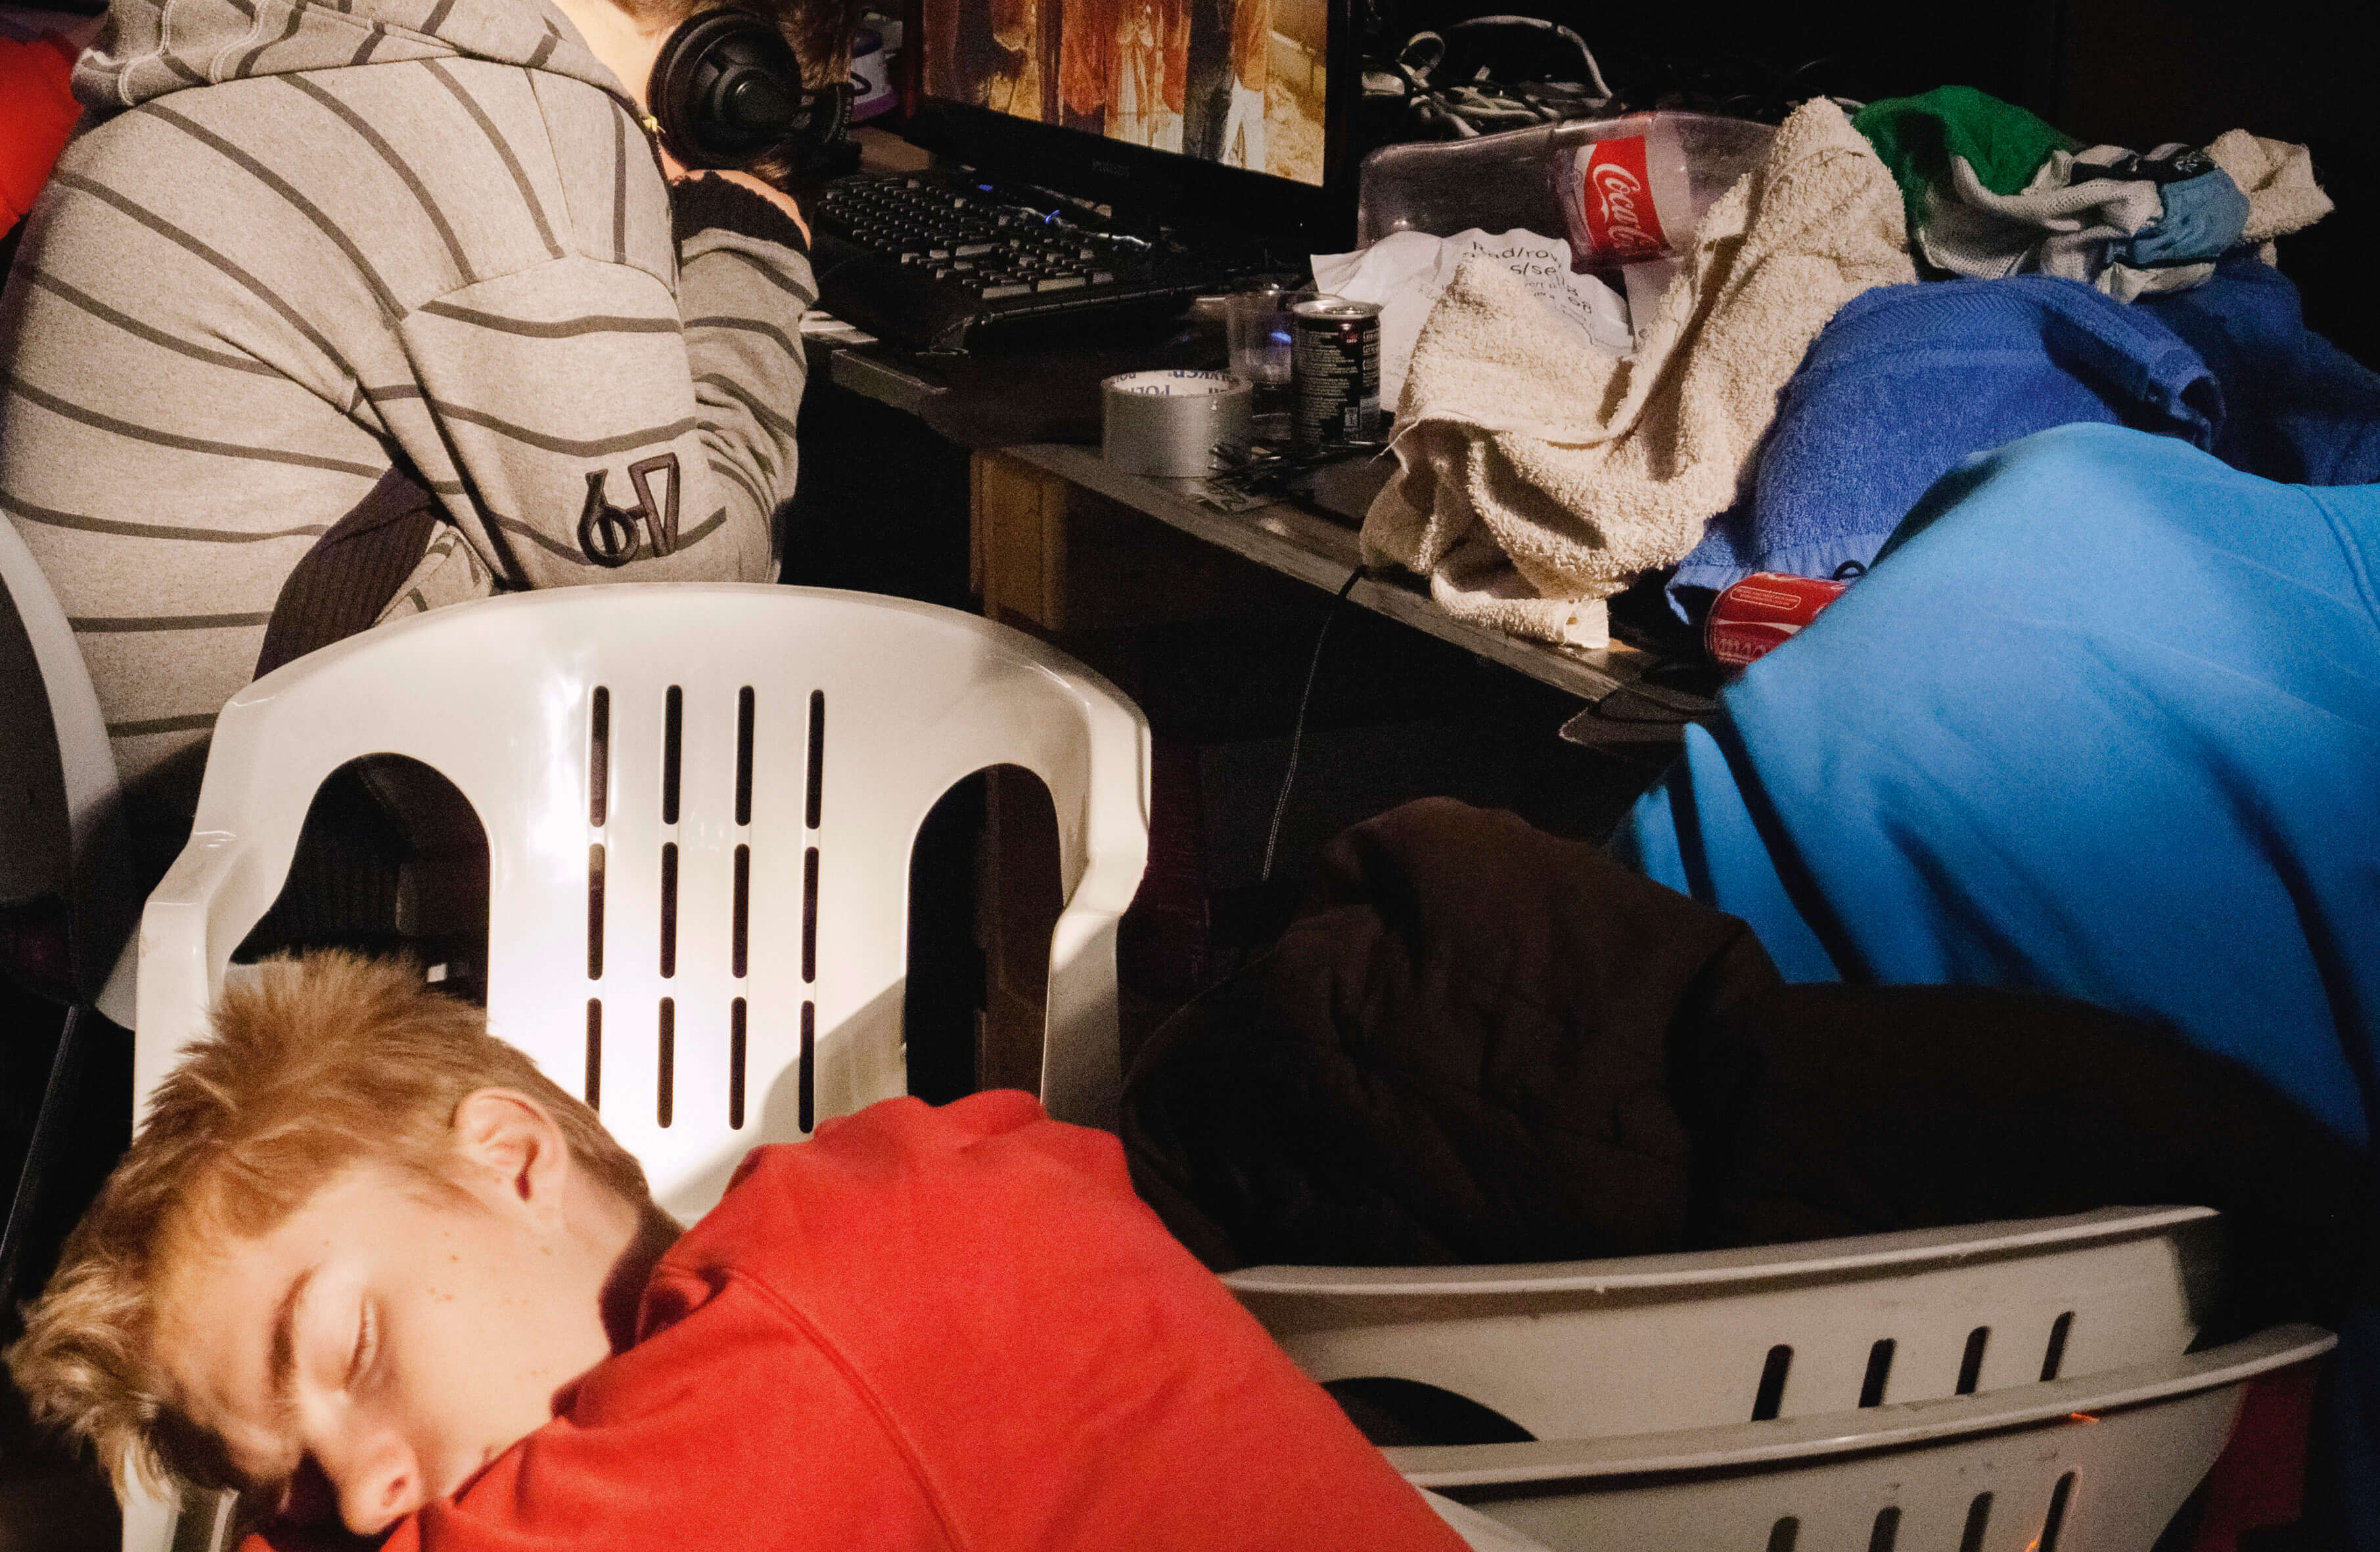 MASSES Magazine No. 5 – Jusqu'à la Mort, Photography by CG Watkins, with the sleeping gamers of The Gathering LAN party in Norway – 2015